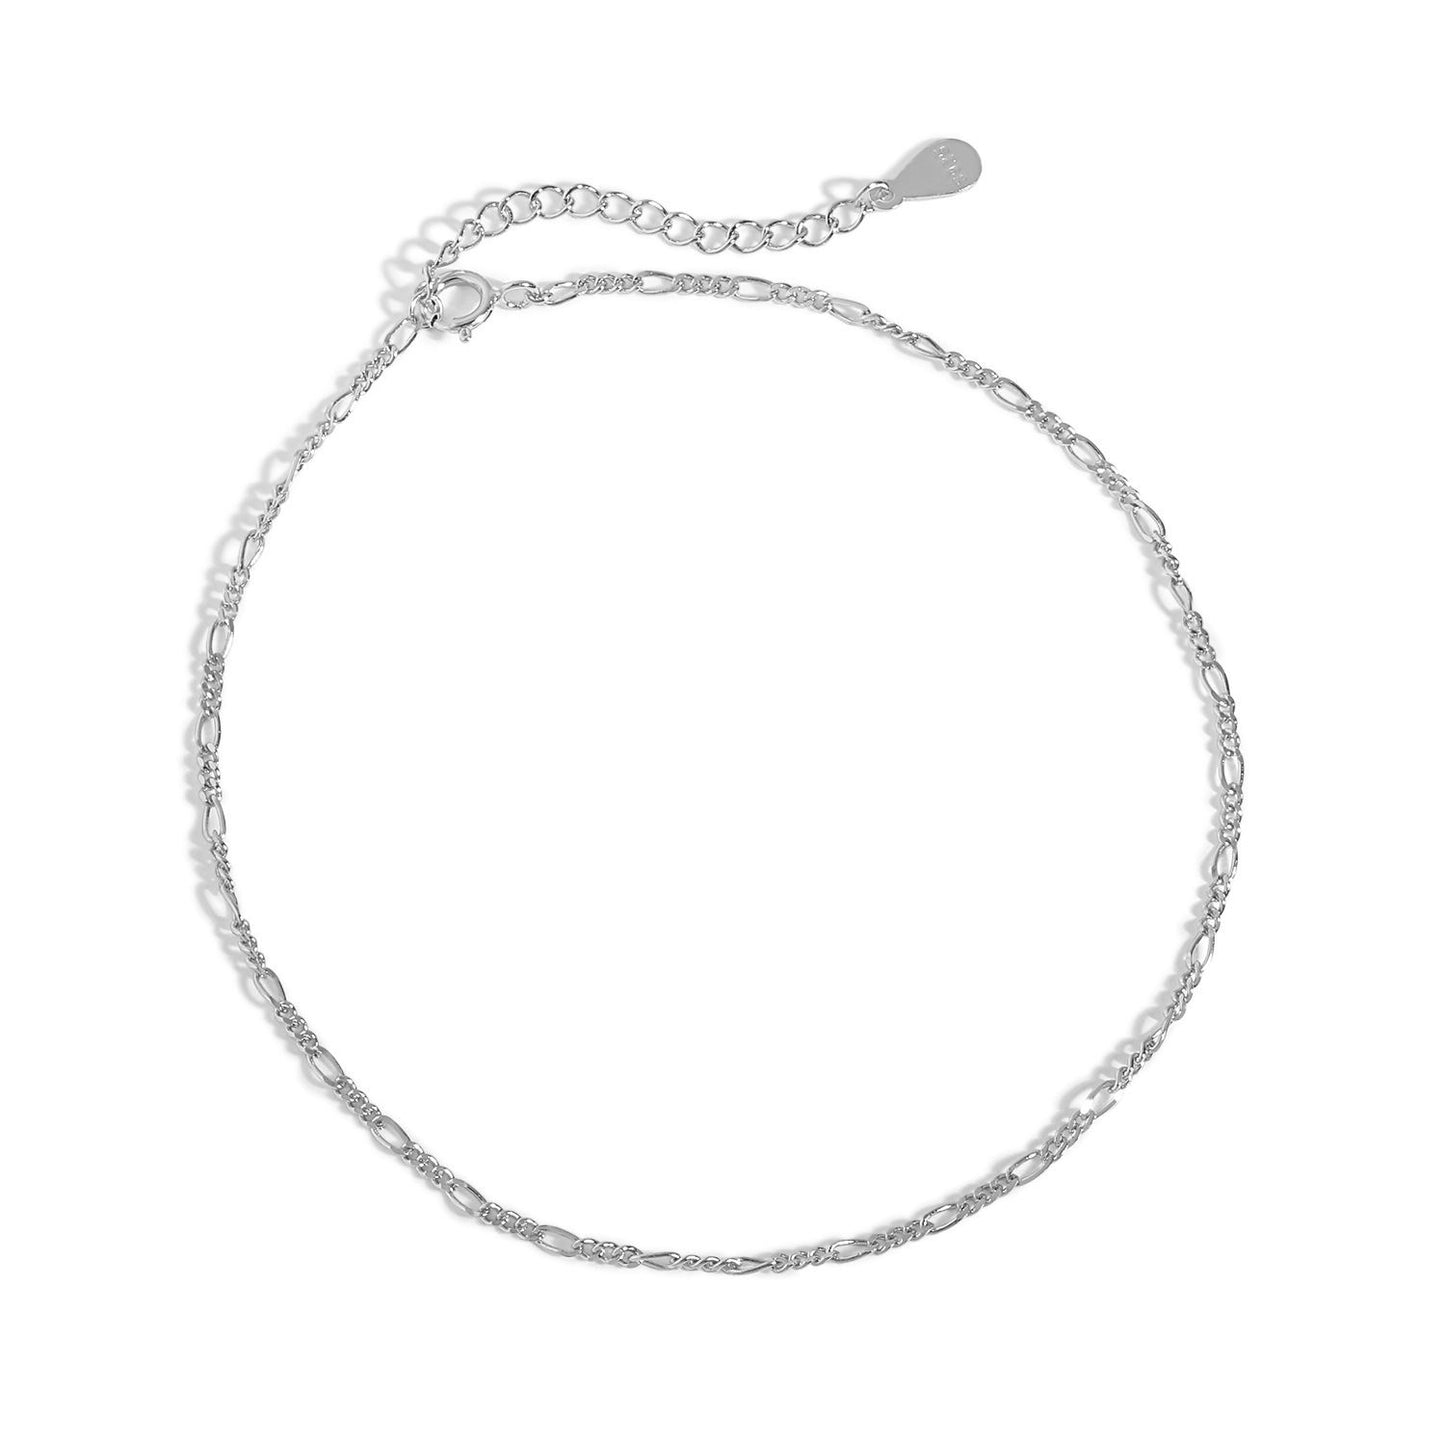 New Hollow Chain 925 Sterling Silver Anklet